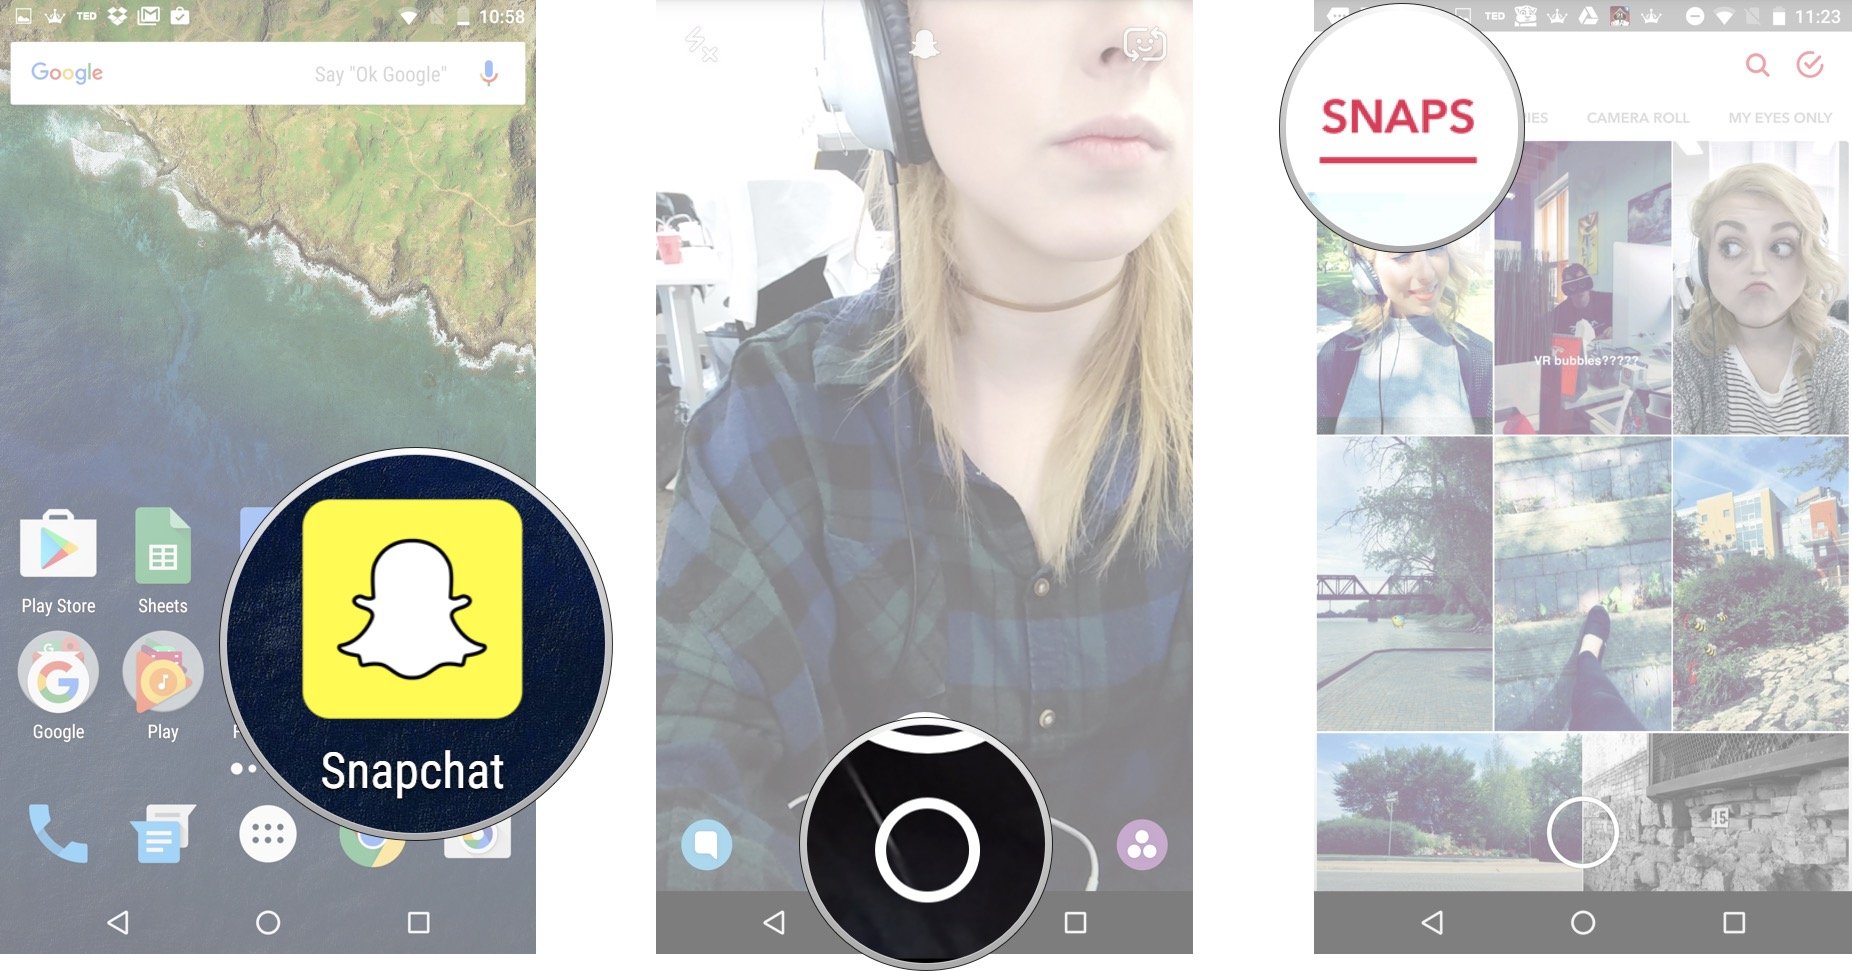 Launch Snapchat from your home screen and tap on the smaller white circle underneath the shutter button to access Memories. Tap the Snaps tab.